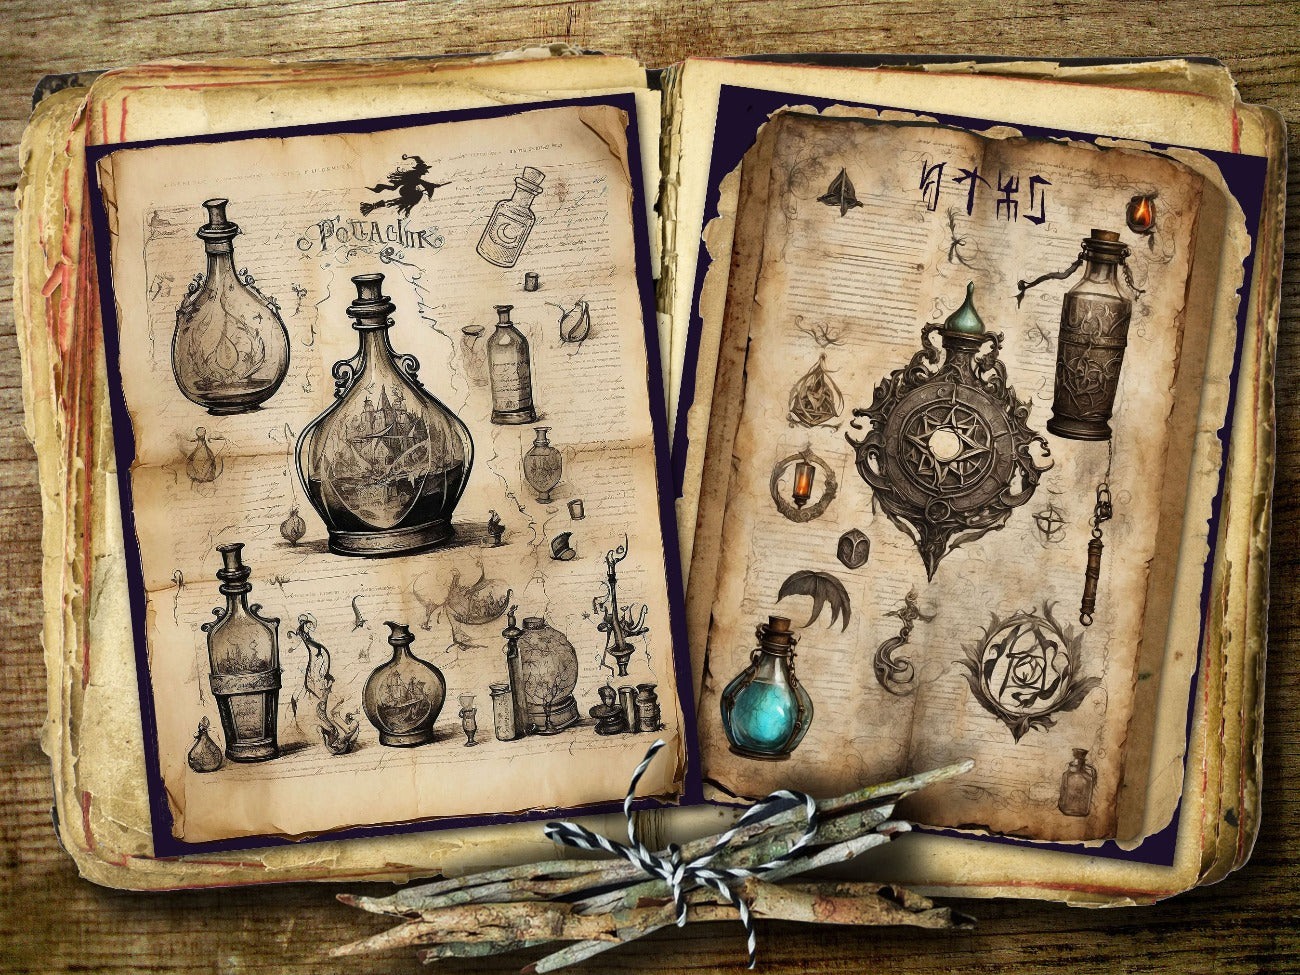 SPELLBOUND POTIONS, Junk Journal Pages, Apothecary Bottles, Fantasy Occult Magic Spellbook Kit, Witchy MagicGrimoire, Spellbook Printable - Morgana Magick Spell